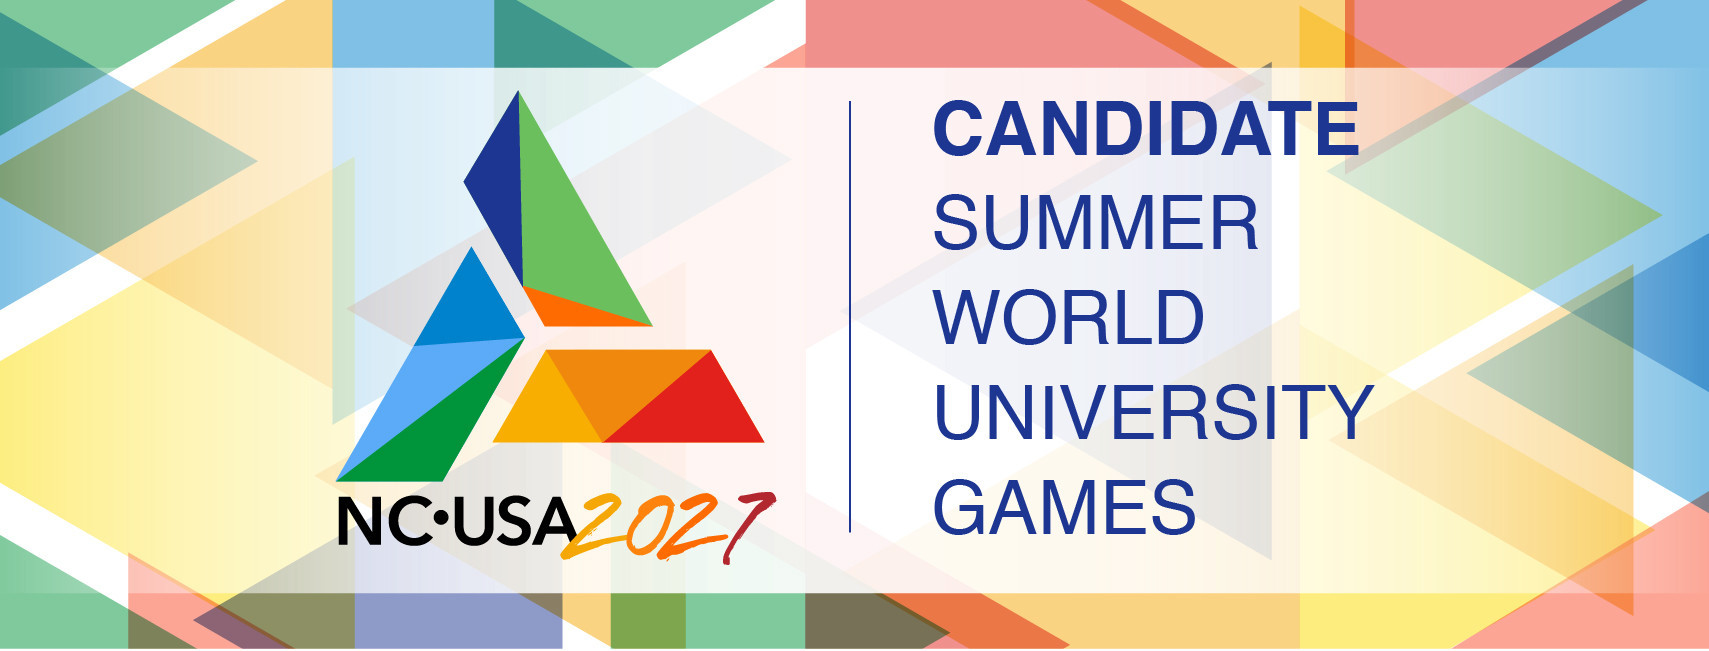 Momentum is gathering behind North Carolina’s bid to host the 2027 Summer World University Games after it made it through to the next round ©North Carolina 2027